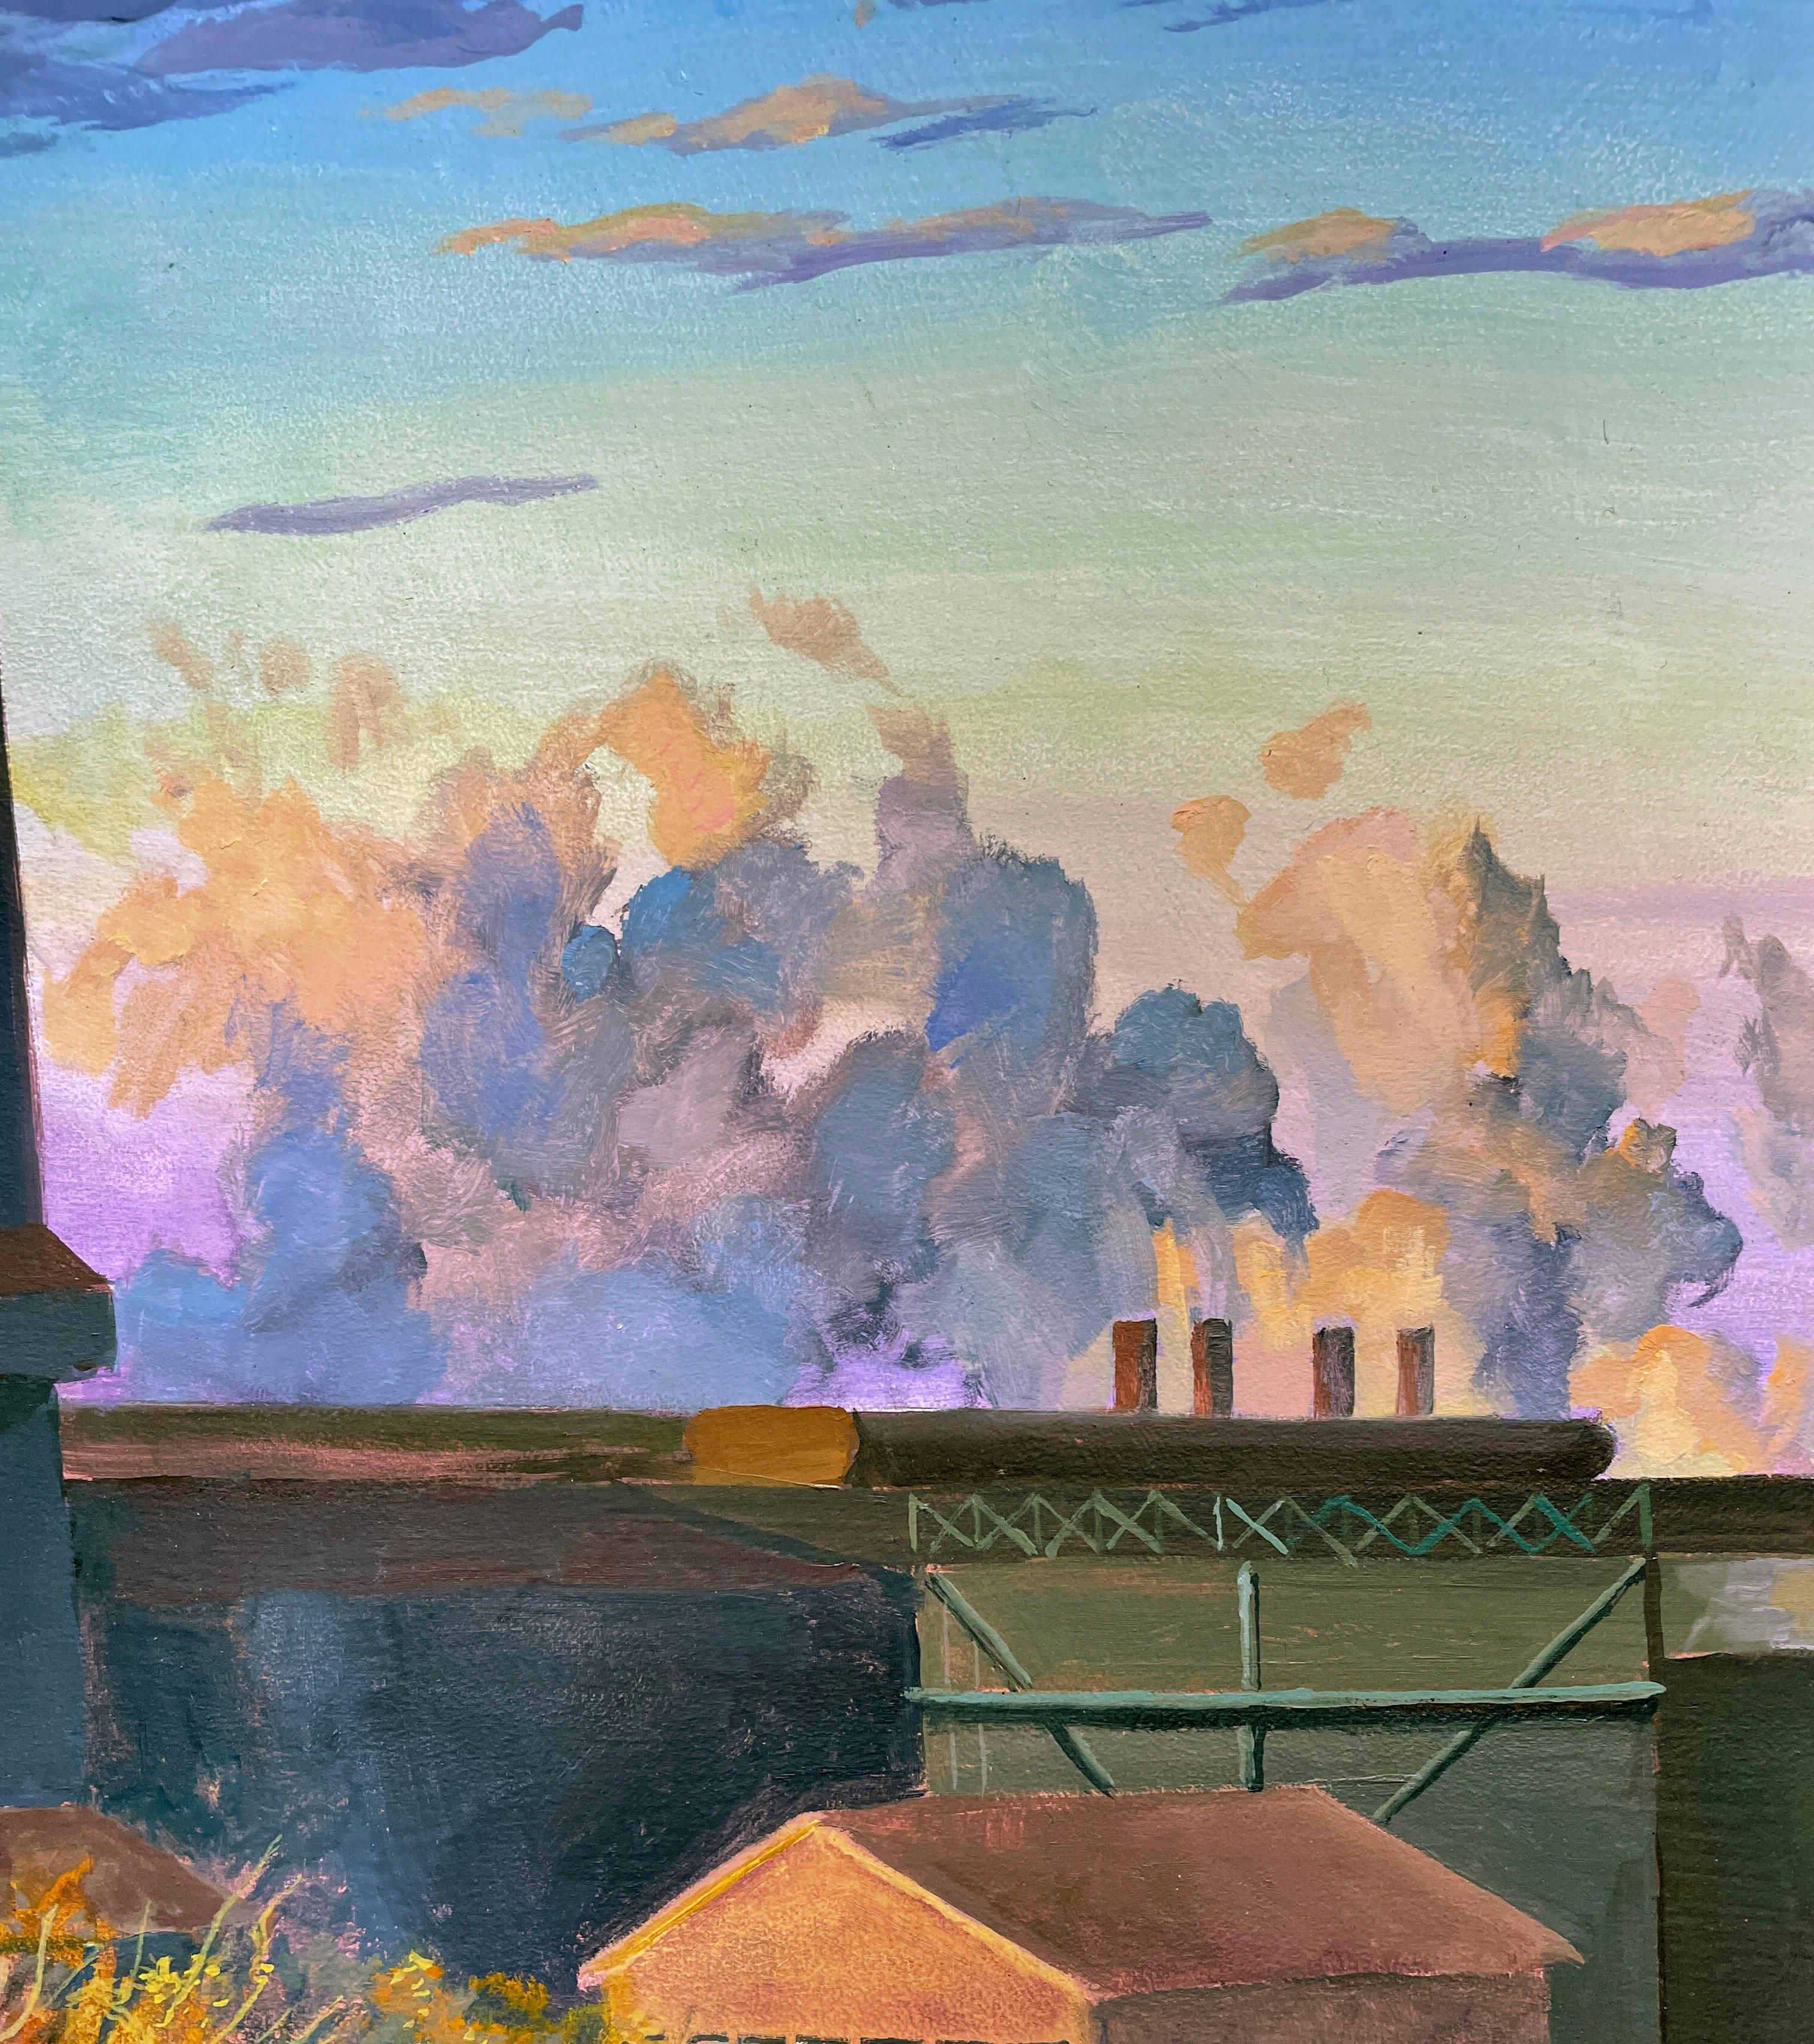  Steel Mills of Gary - Urban Industrial Landscape, Factories with Dramatic Sky - Gray Landscape Painting by Art Chartow